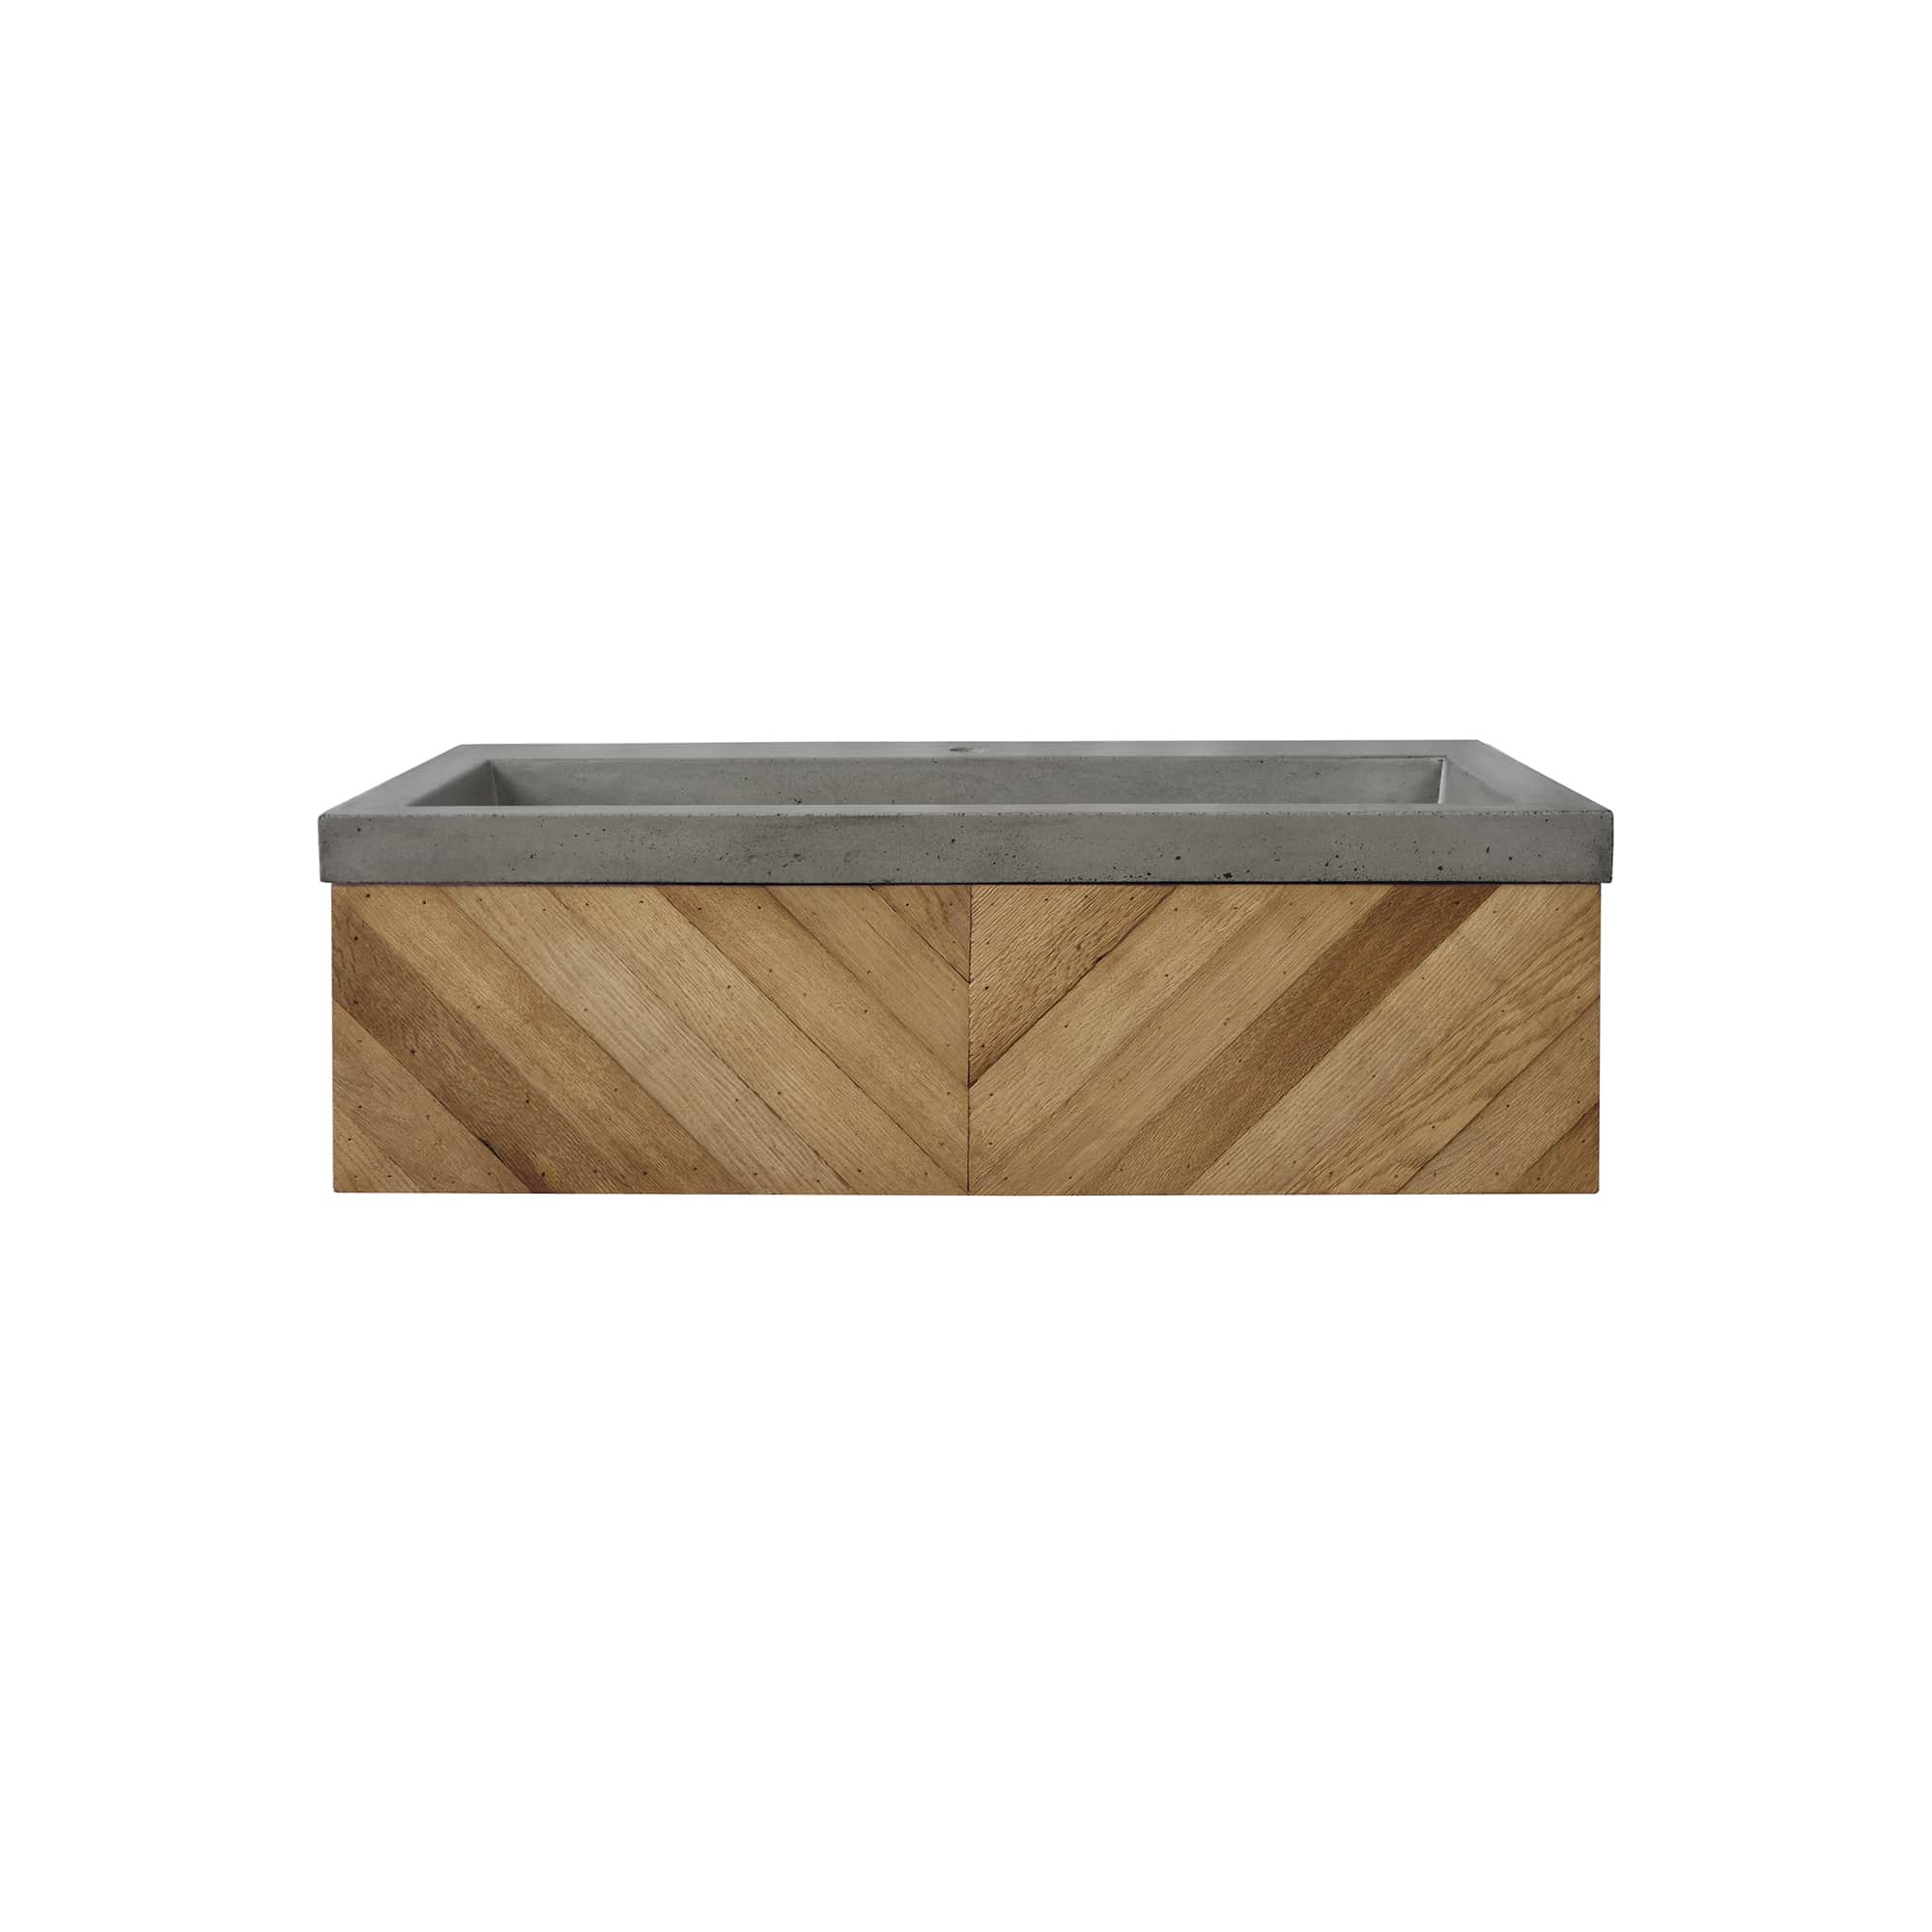 Native Trails 36 inches chardonnay floating vanity with nativestone trough in ash vnw191-nsl3619-a